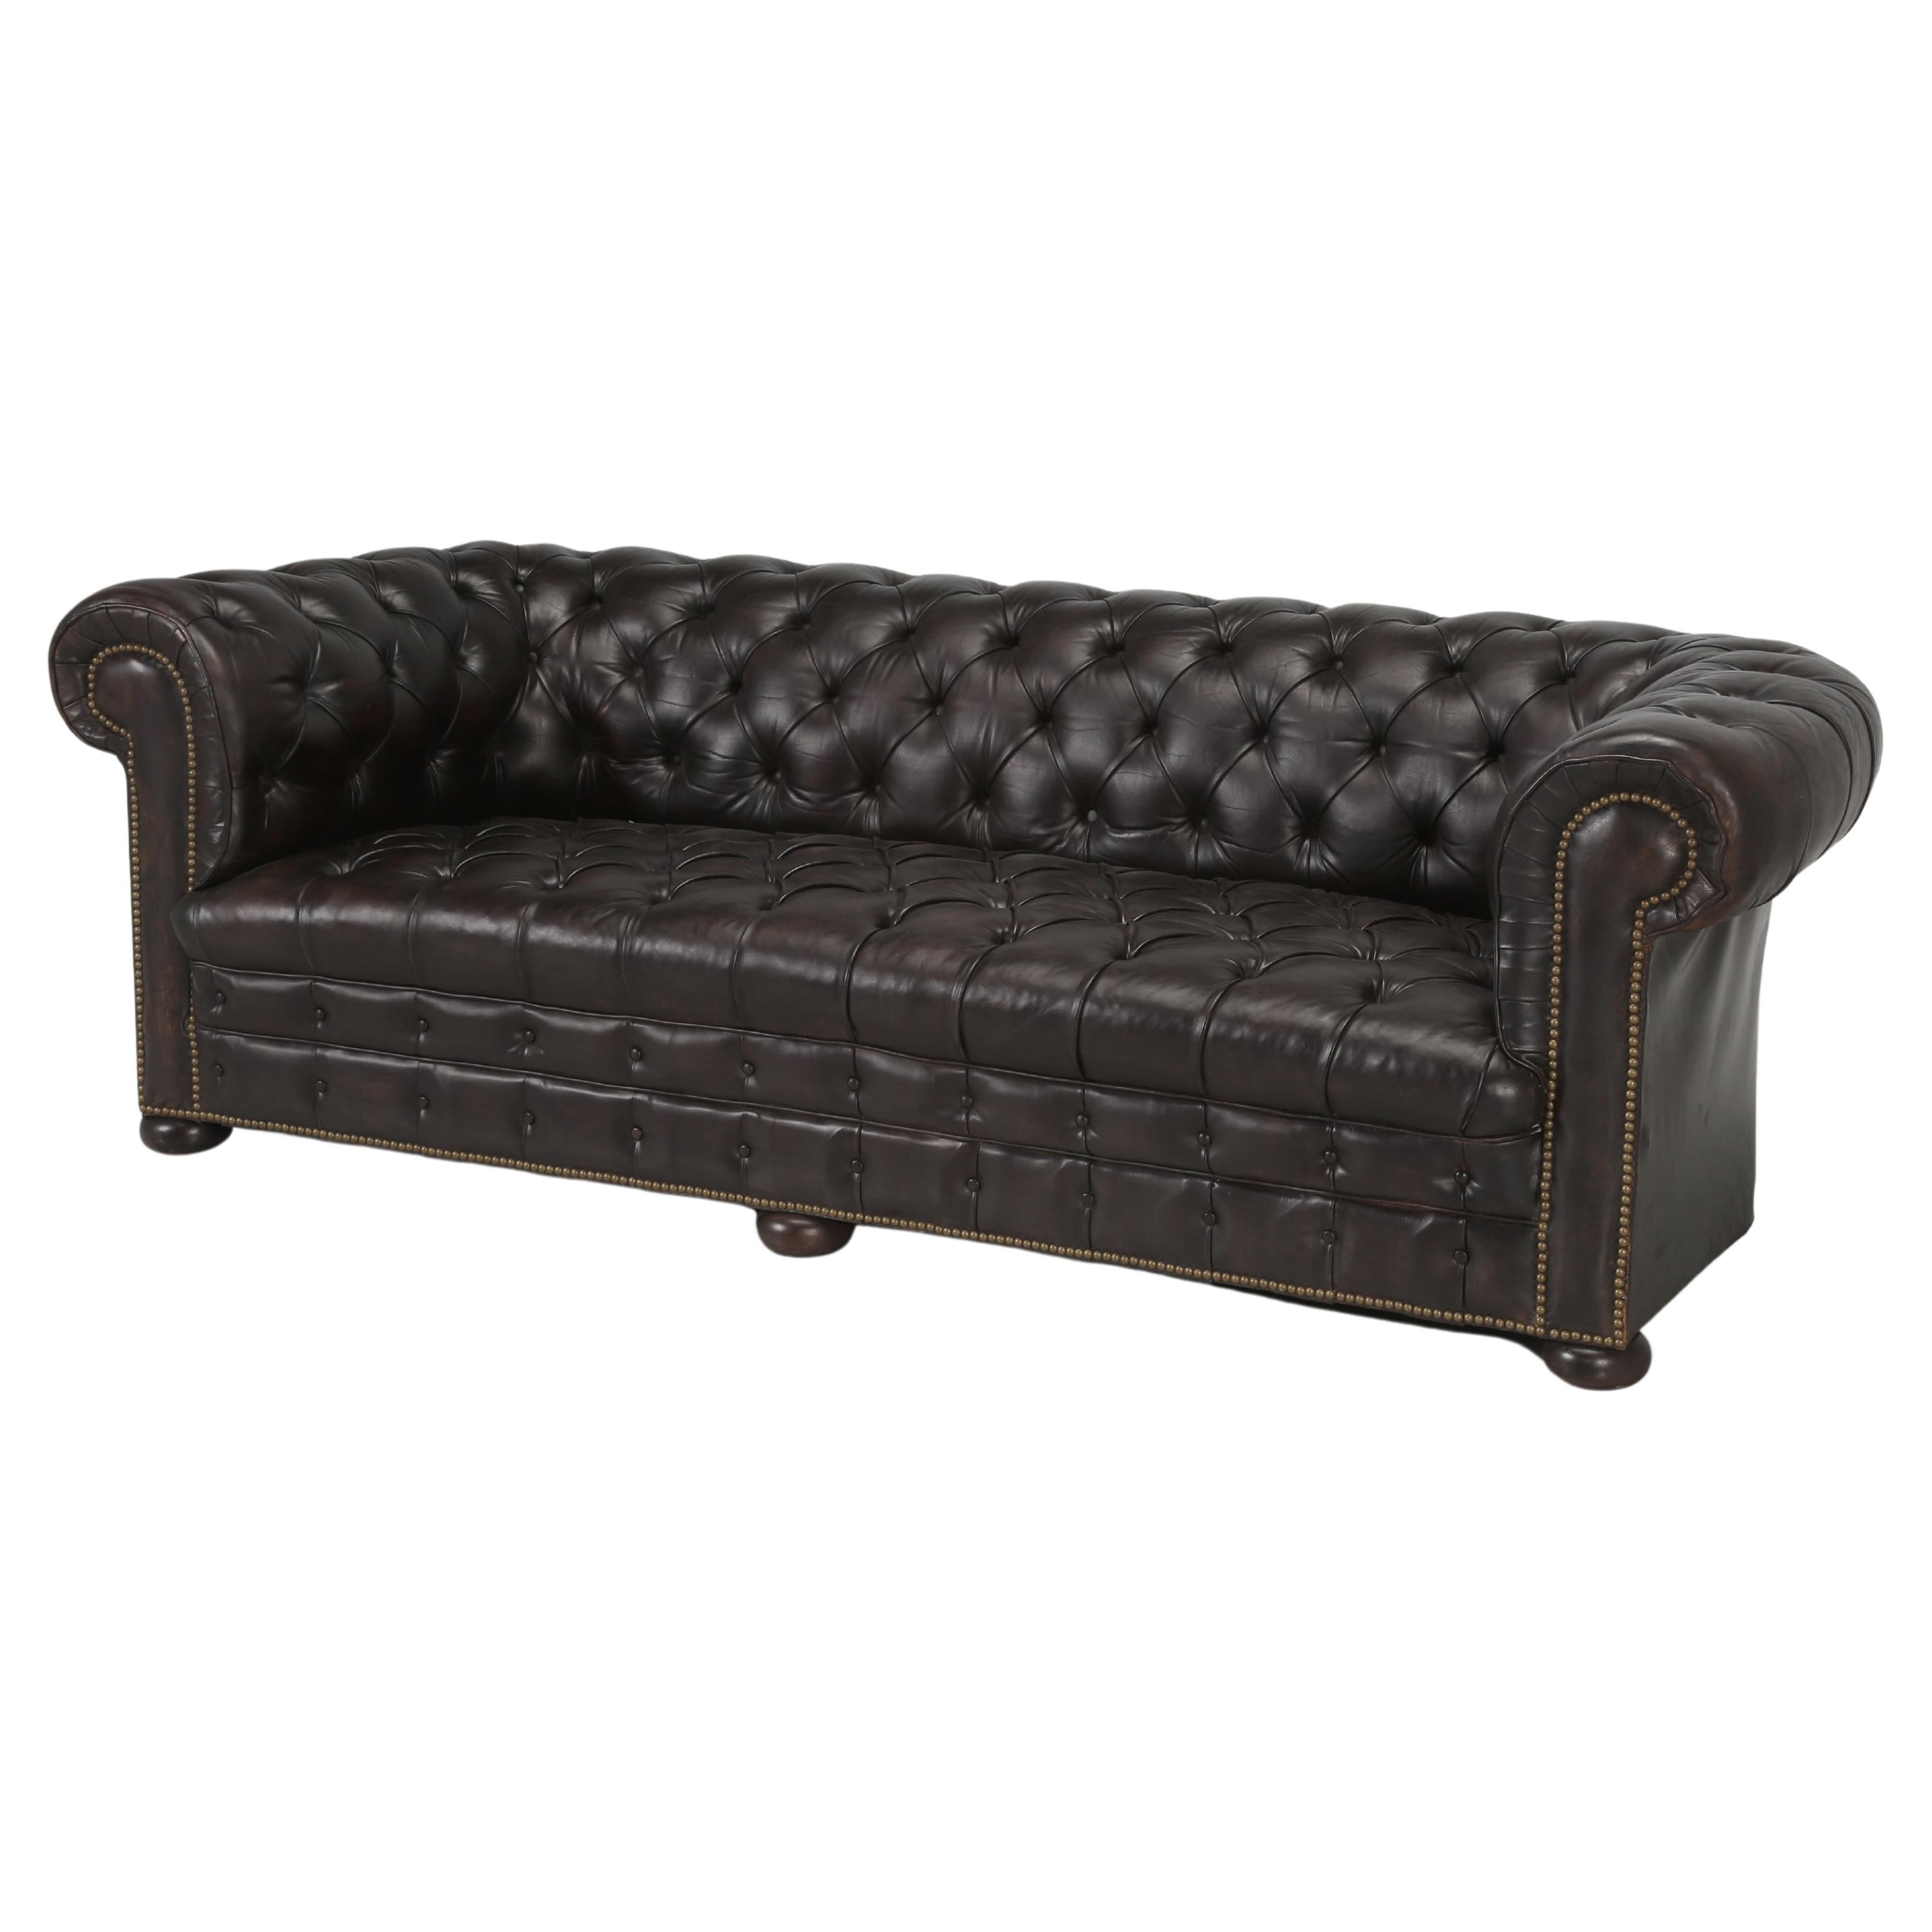 Antique English Tufted Original Leather Chesterfield Sofa Thoroughly Restored For Sale